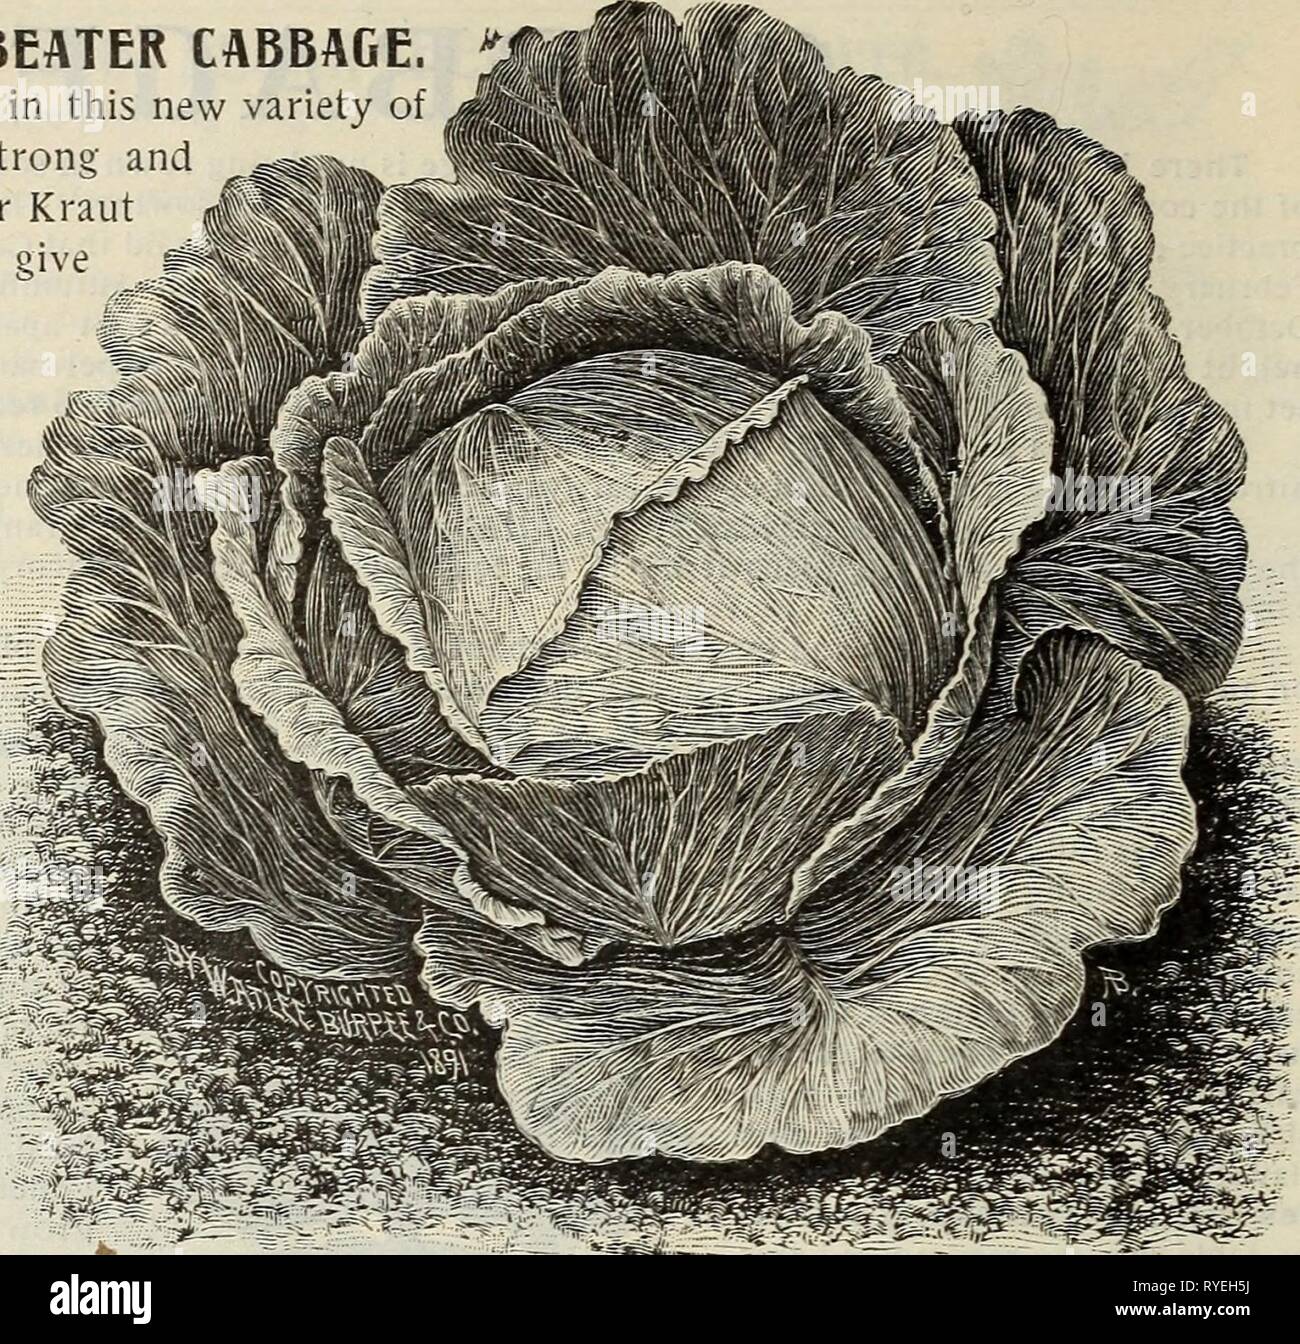 E. H. Hunt : seedsman  ehhuntseedsman1895hunt Year: 1895  14 E. H. HUNT, SEEDSMAN, CHICAGO, ILLINOIS. BURPEE'S WORLD BEATER CABBAGE. The claims for excellence in this new variety of Cabbage are many and strong and those desiring great size for Kraut purposes will do well to give this variety a trial. The introducer says: 'The World Beater' is fully as large as the Marblehead Mammoth, that it is uni- formly true to type and sure to head, 'solid as a rock.' The large broad heads are very thick through slightly rounded at the top; fine grained and tender—more so than any other large Cab- bage. St Stock Photo